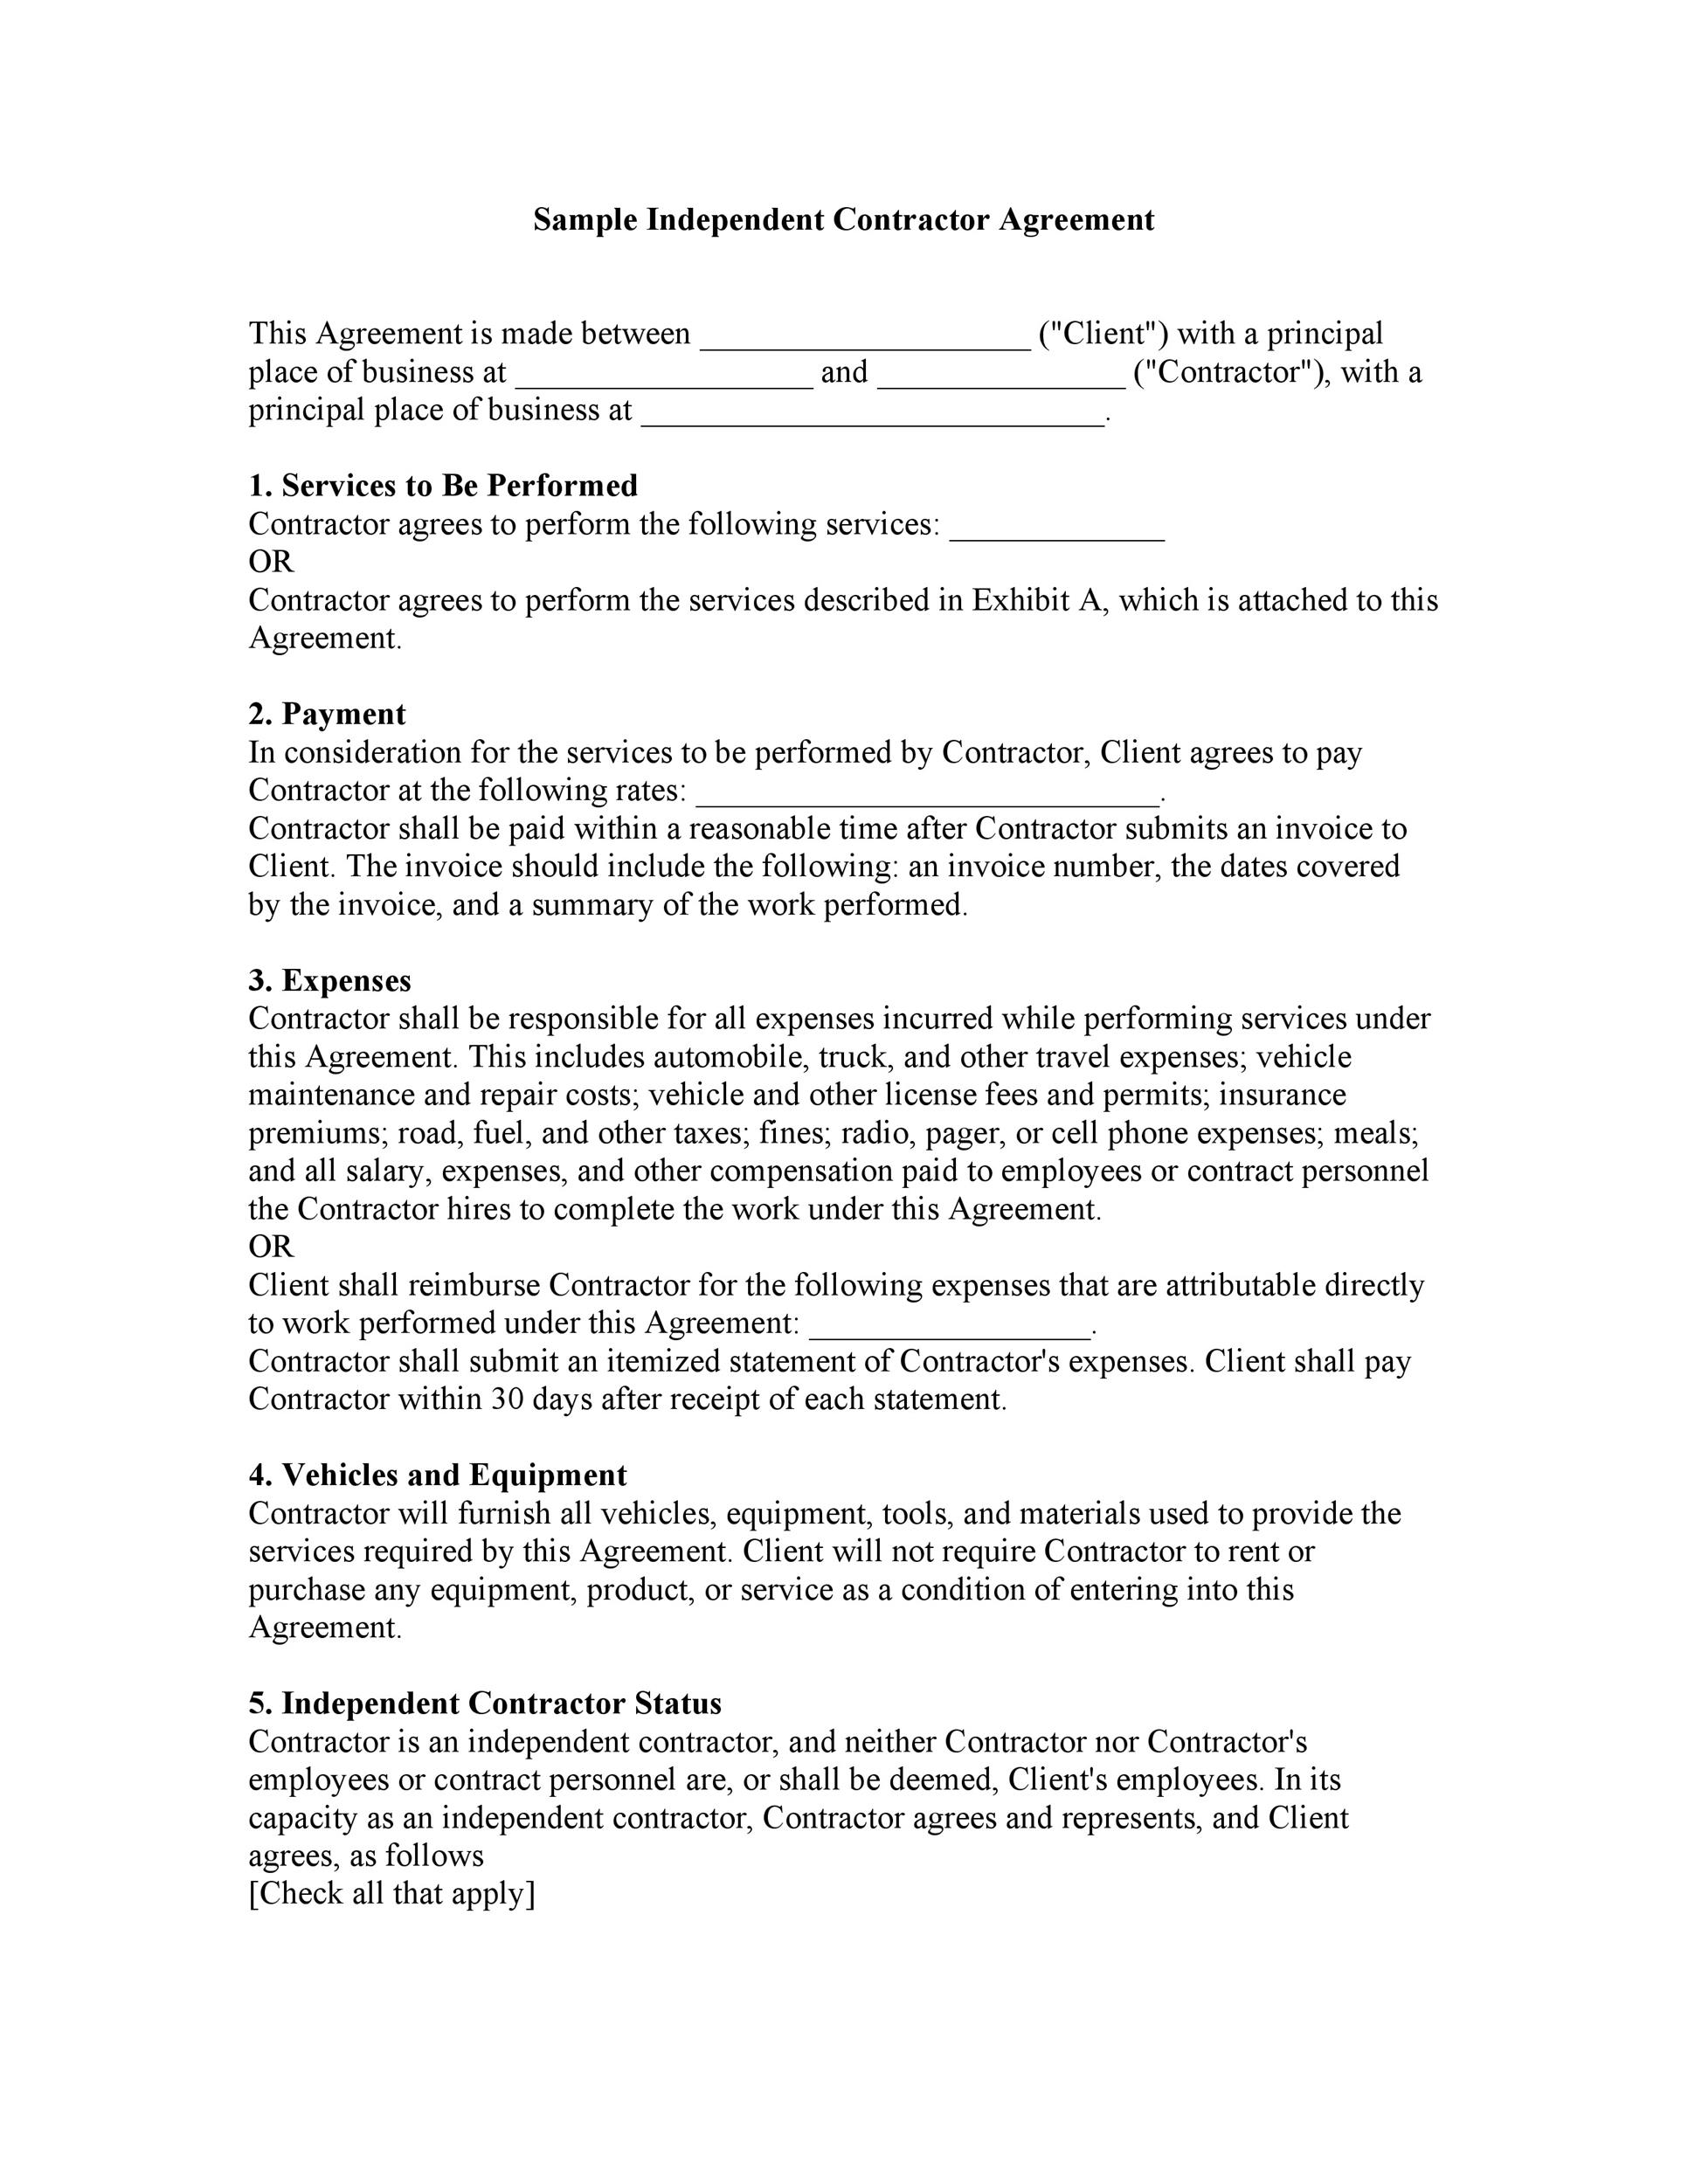 Free independent contractor agreement 03